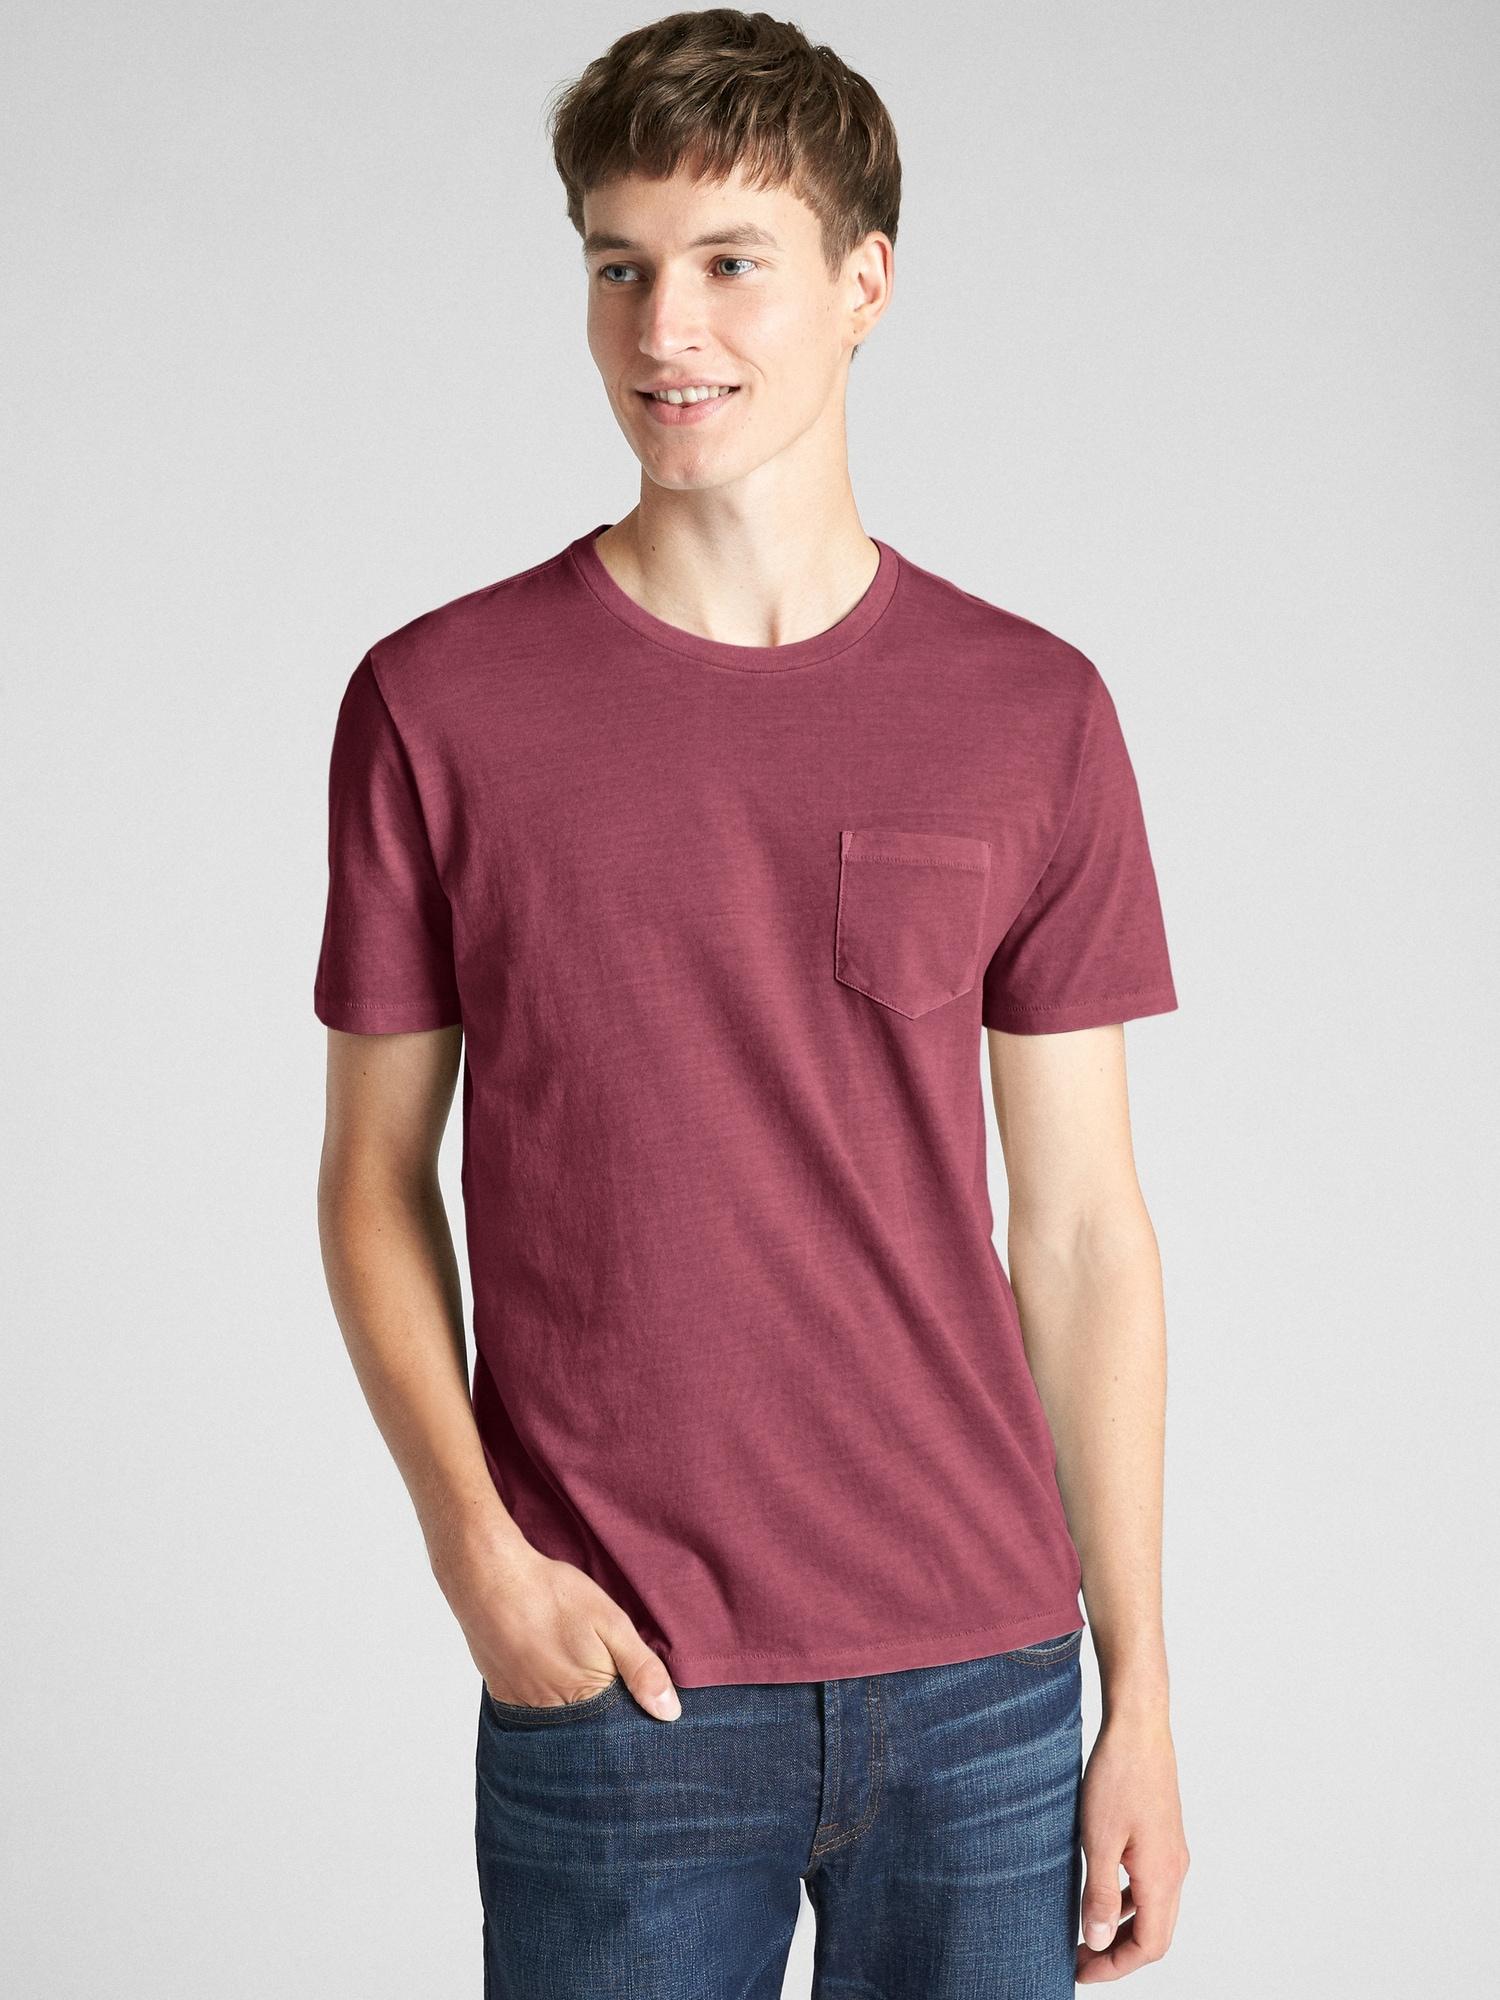 gap inspired red t shirts